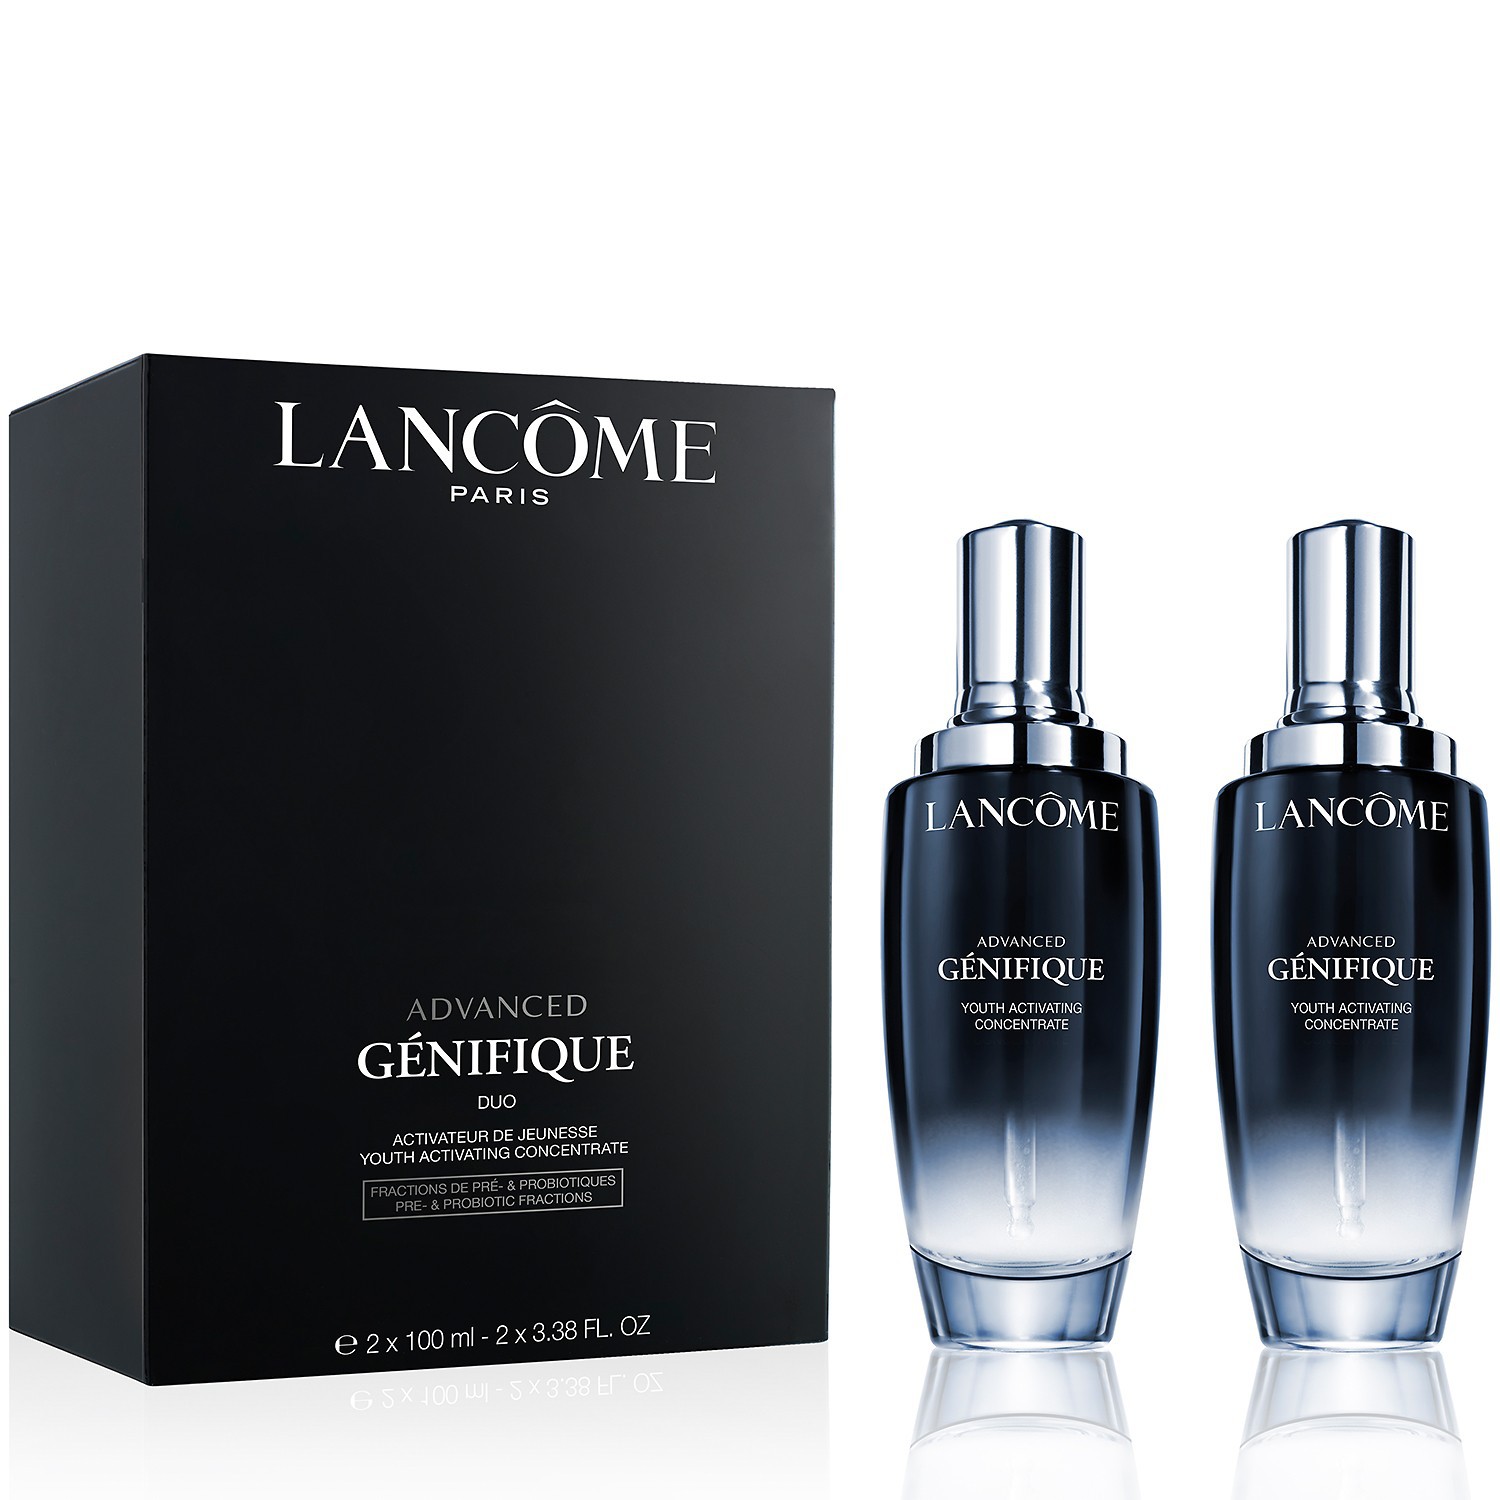 ADVANCED GENIFIQUE YOUTH ACTIVATING CONCENTRATE DUO